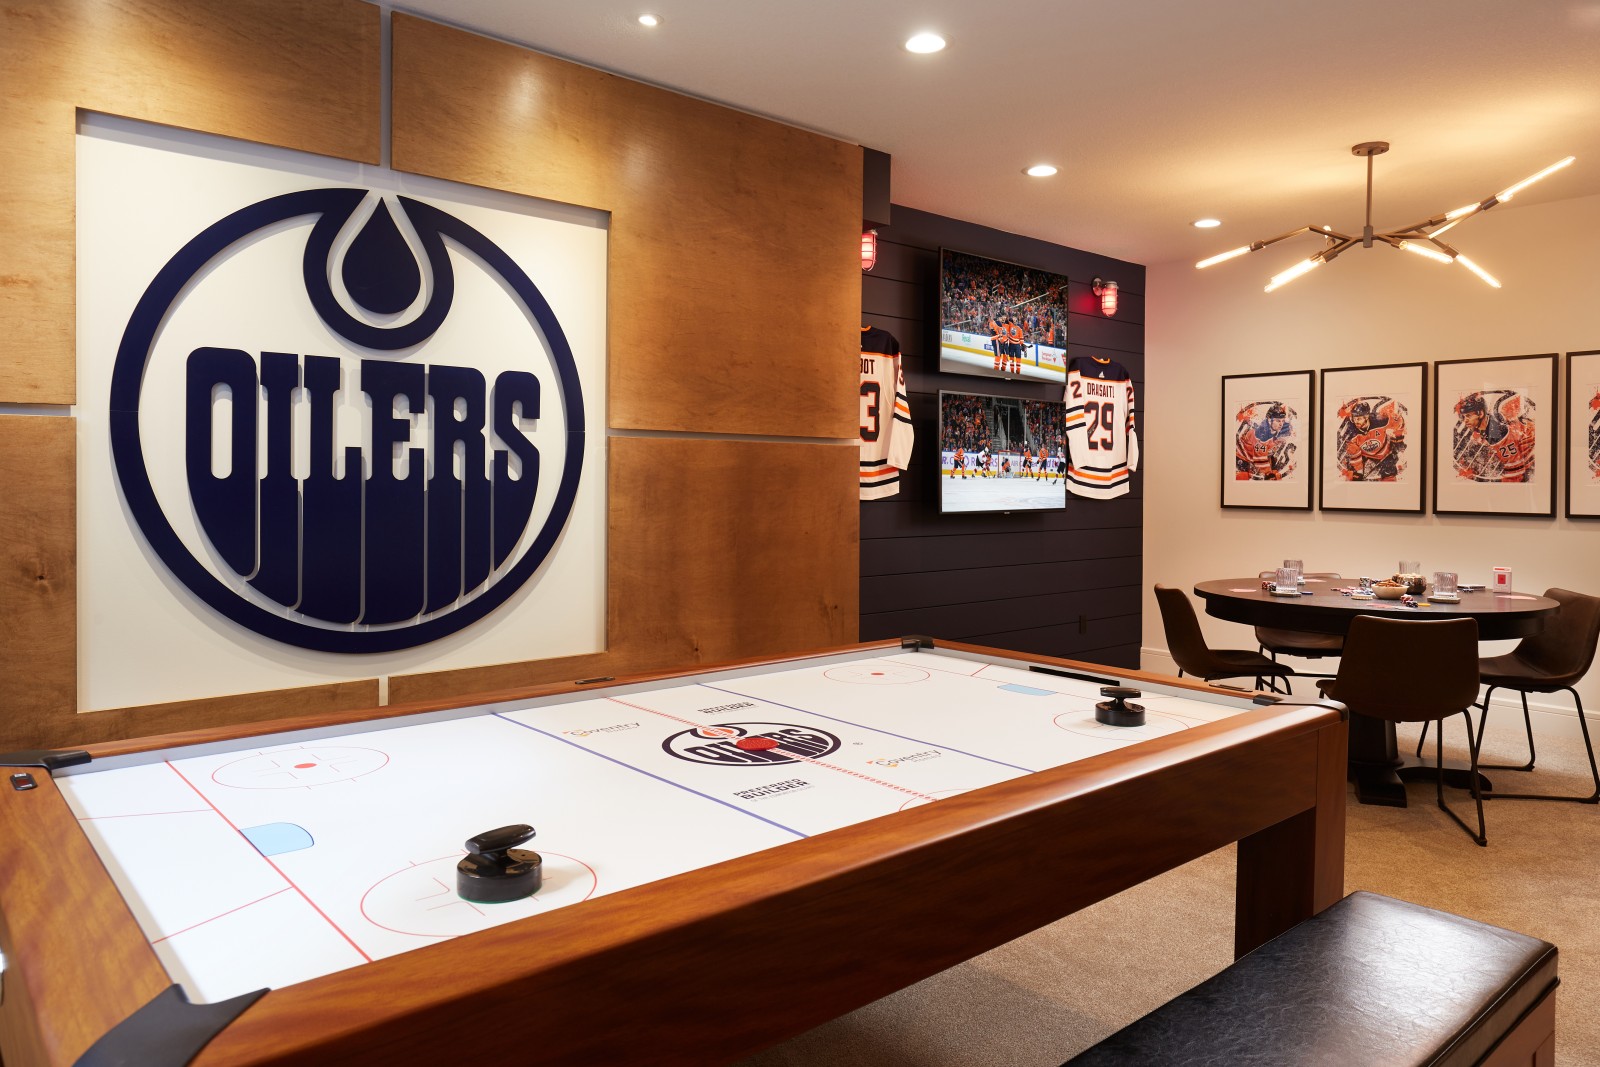 Archer Showhome Fan Cave photo with large, blue, Oilers logo on feature wall with warm wood panels around it